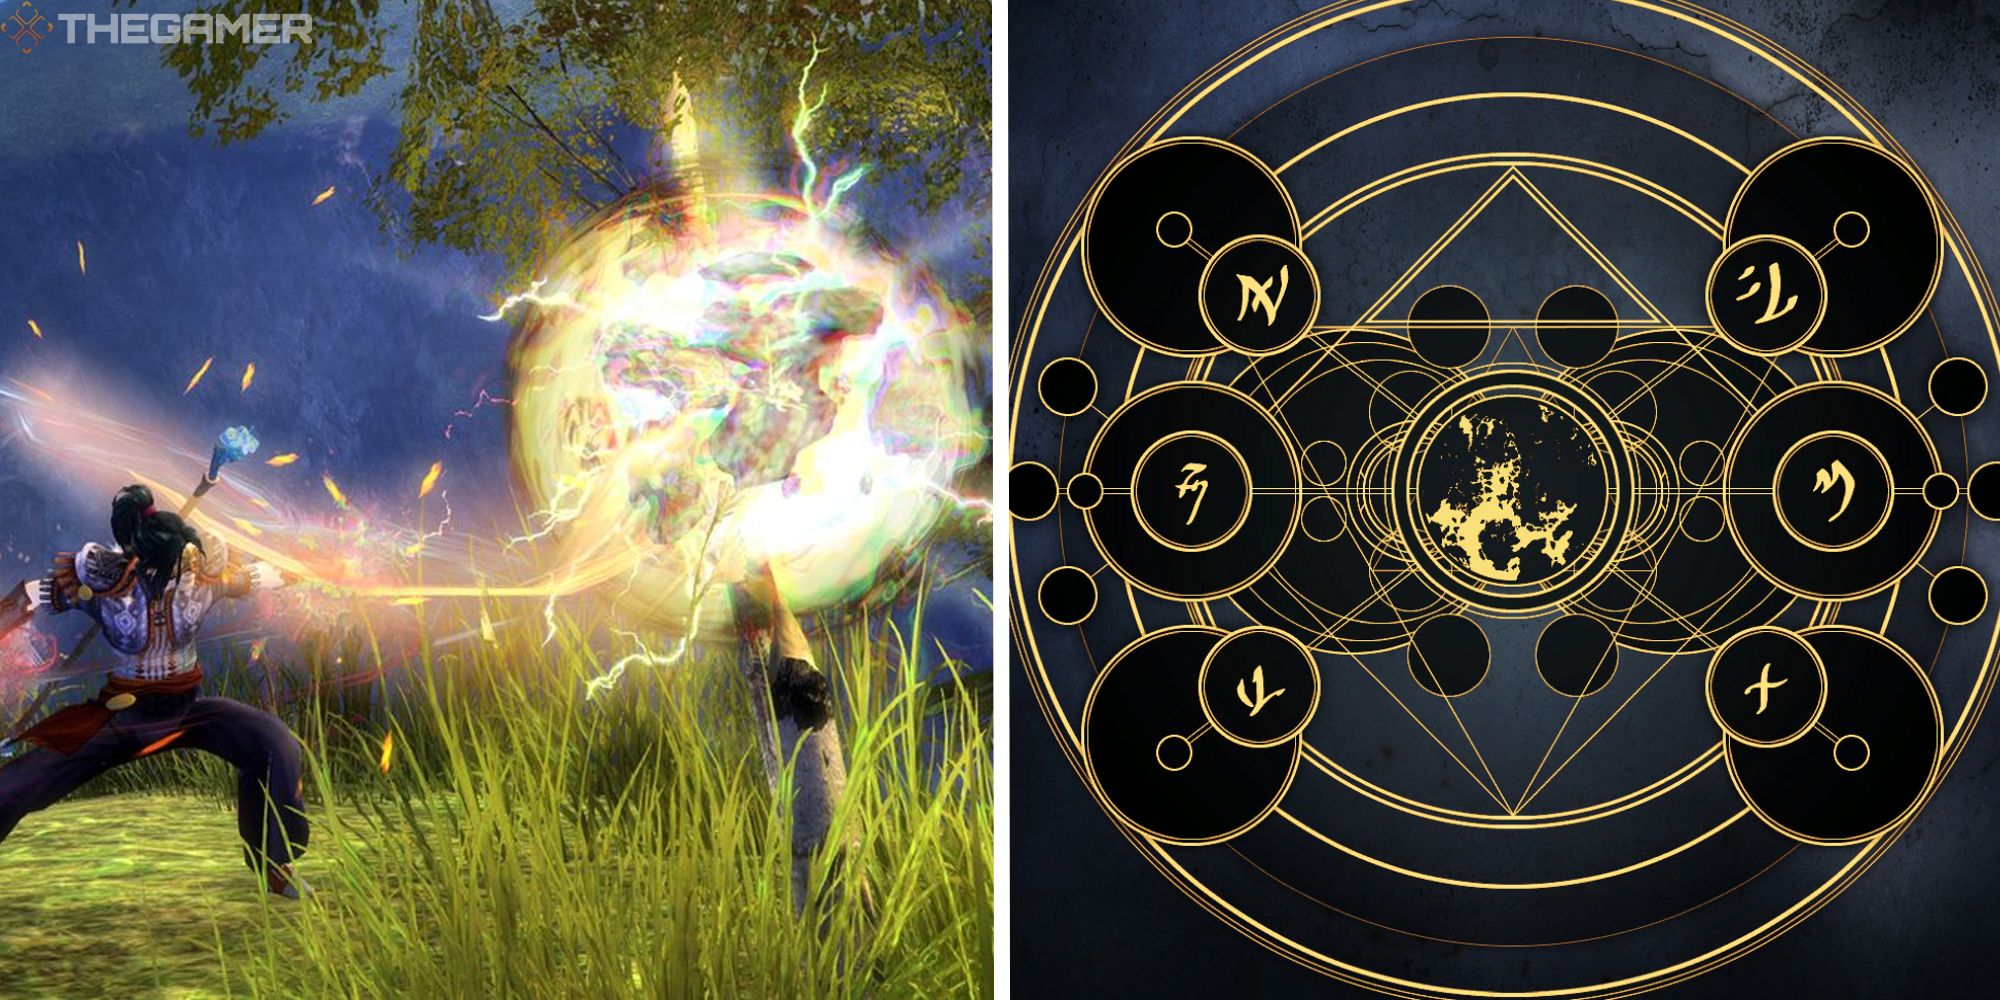 split image showing player using magic next to image of the all sytem